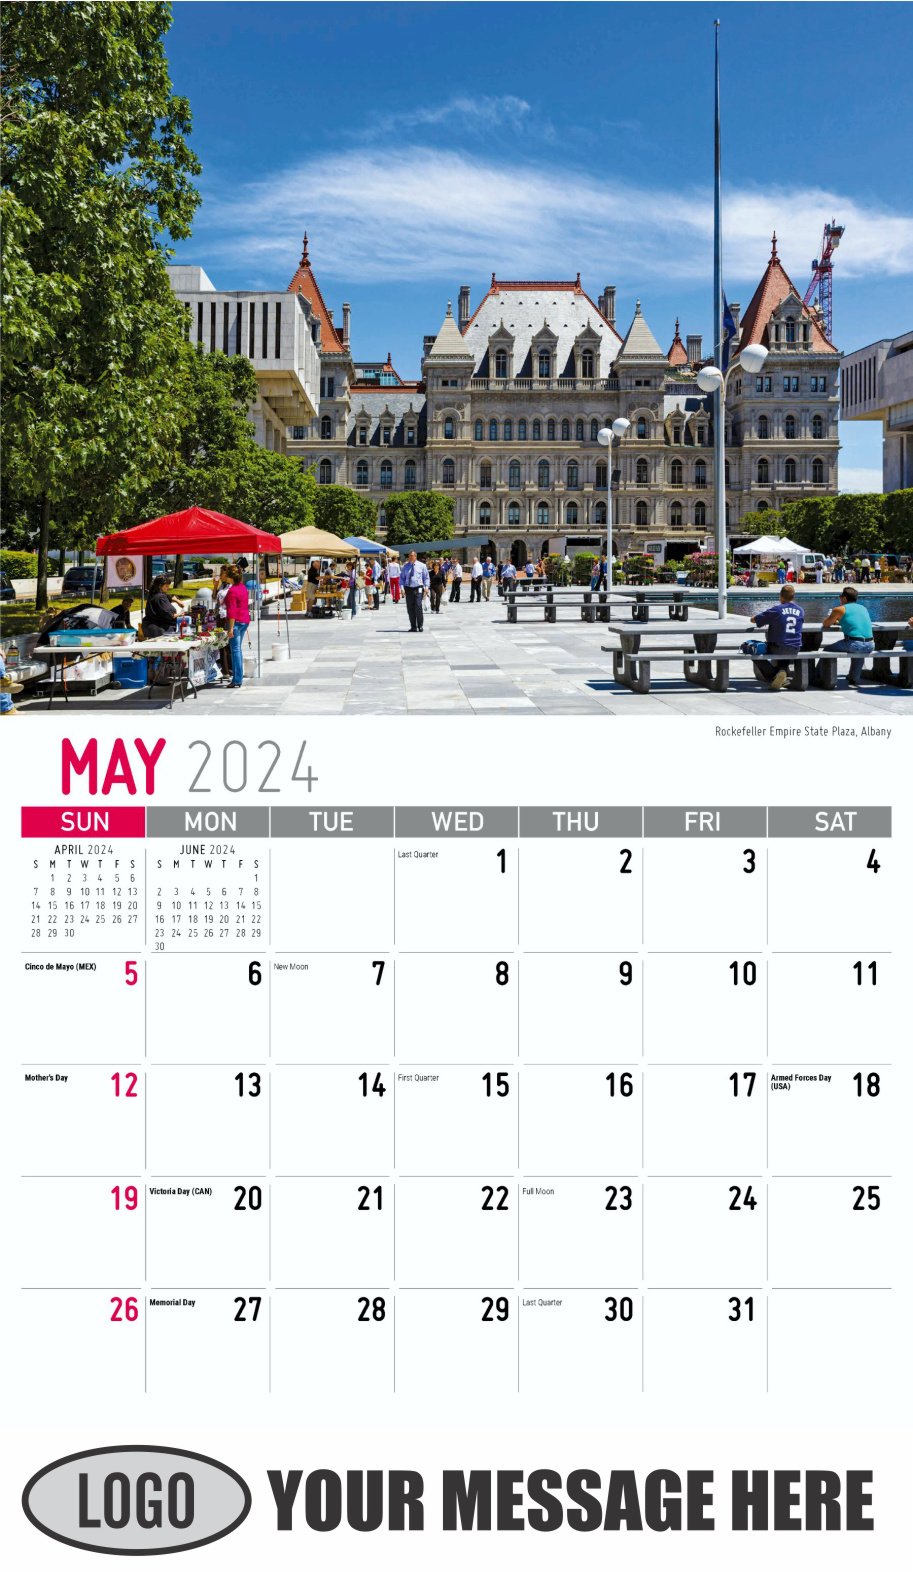 Scenes of New York 2024 Business Promotional Wall Calendar - May